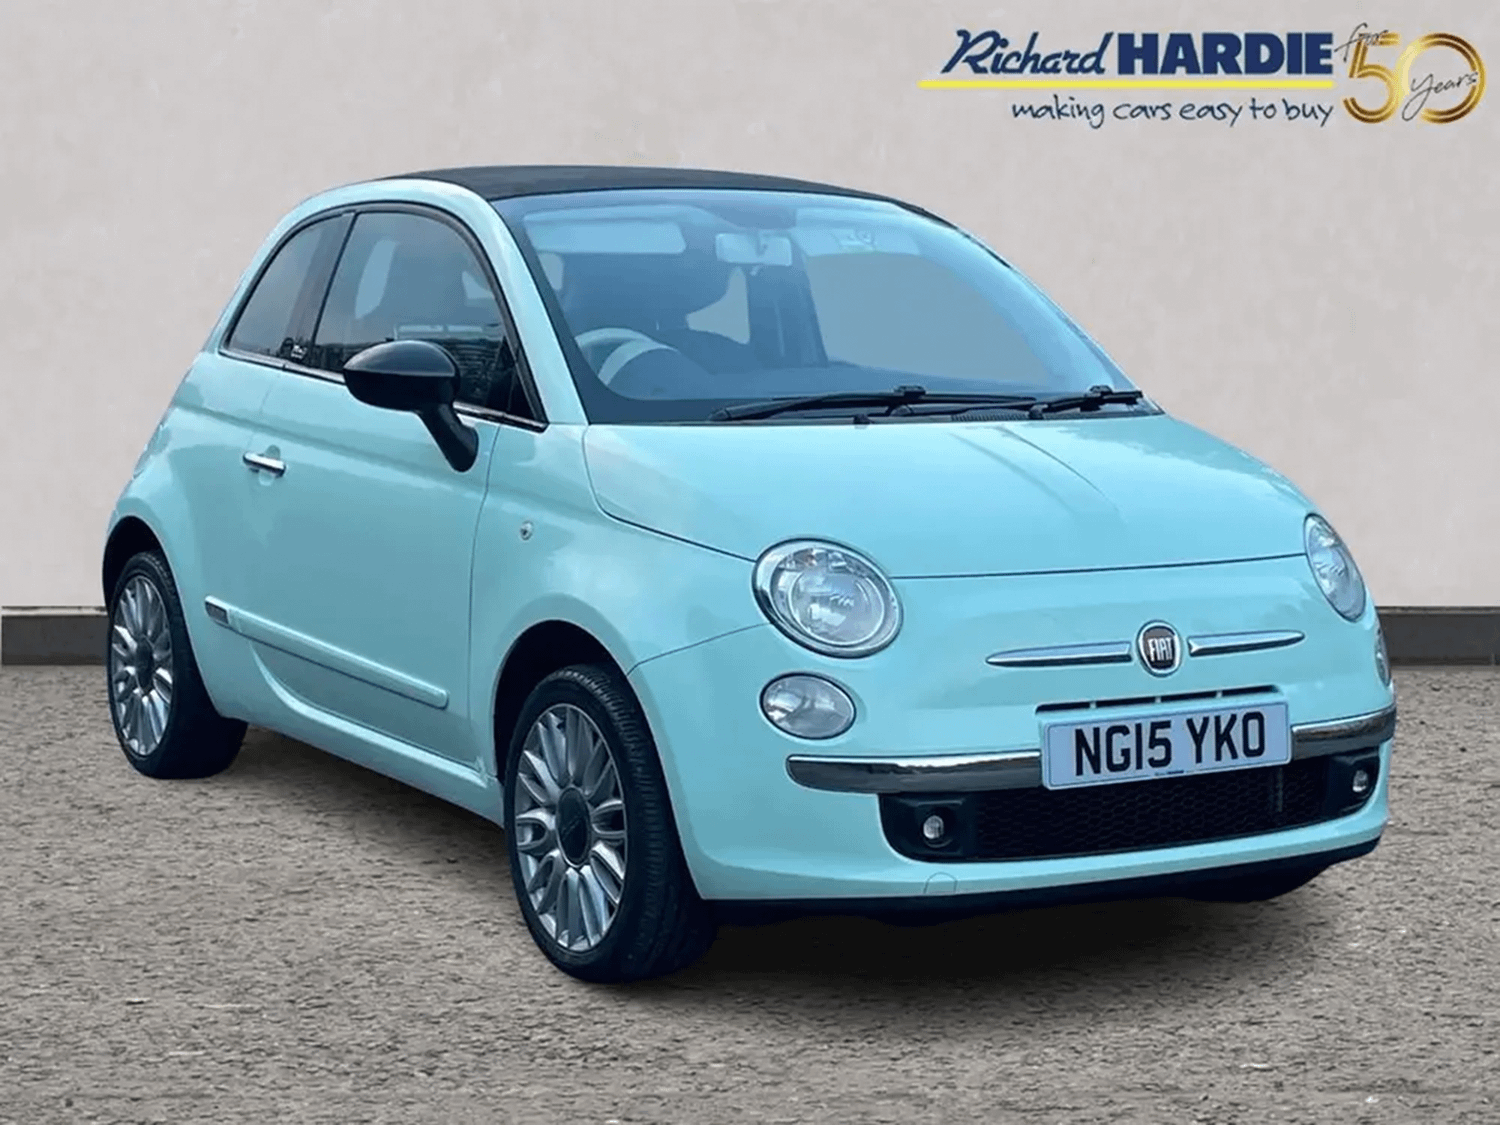 Used Fiat 500 for sale at Richard Hardie